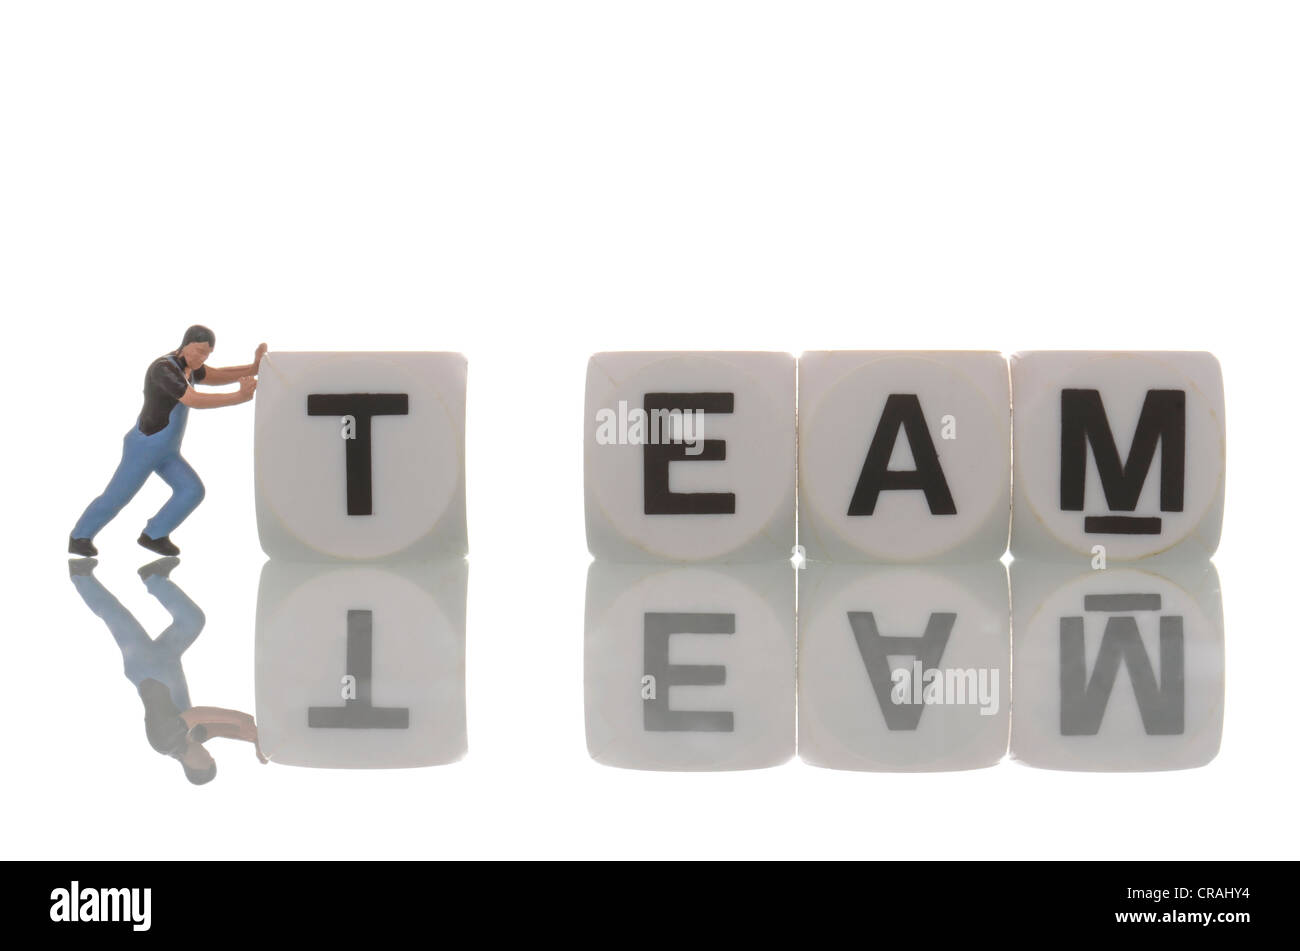 Small figurine of a workman pushing letters of the word 'team' together, symbolic image Stock Photo